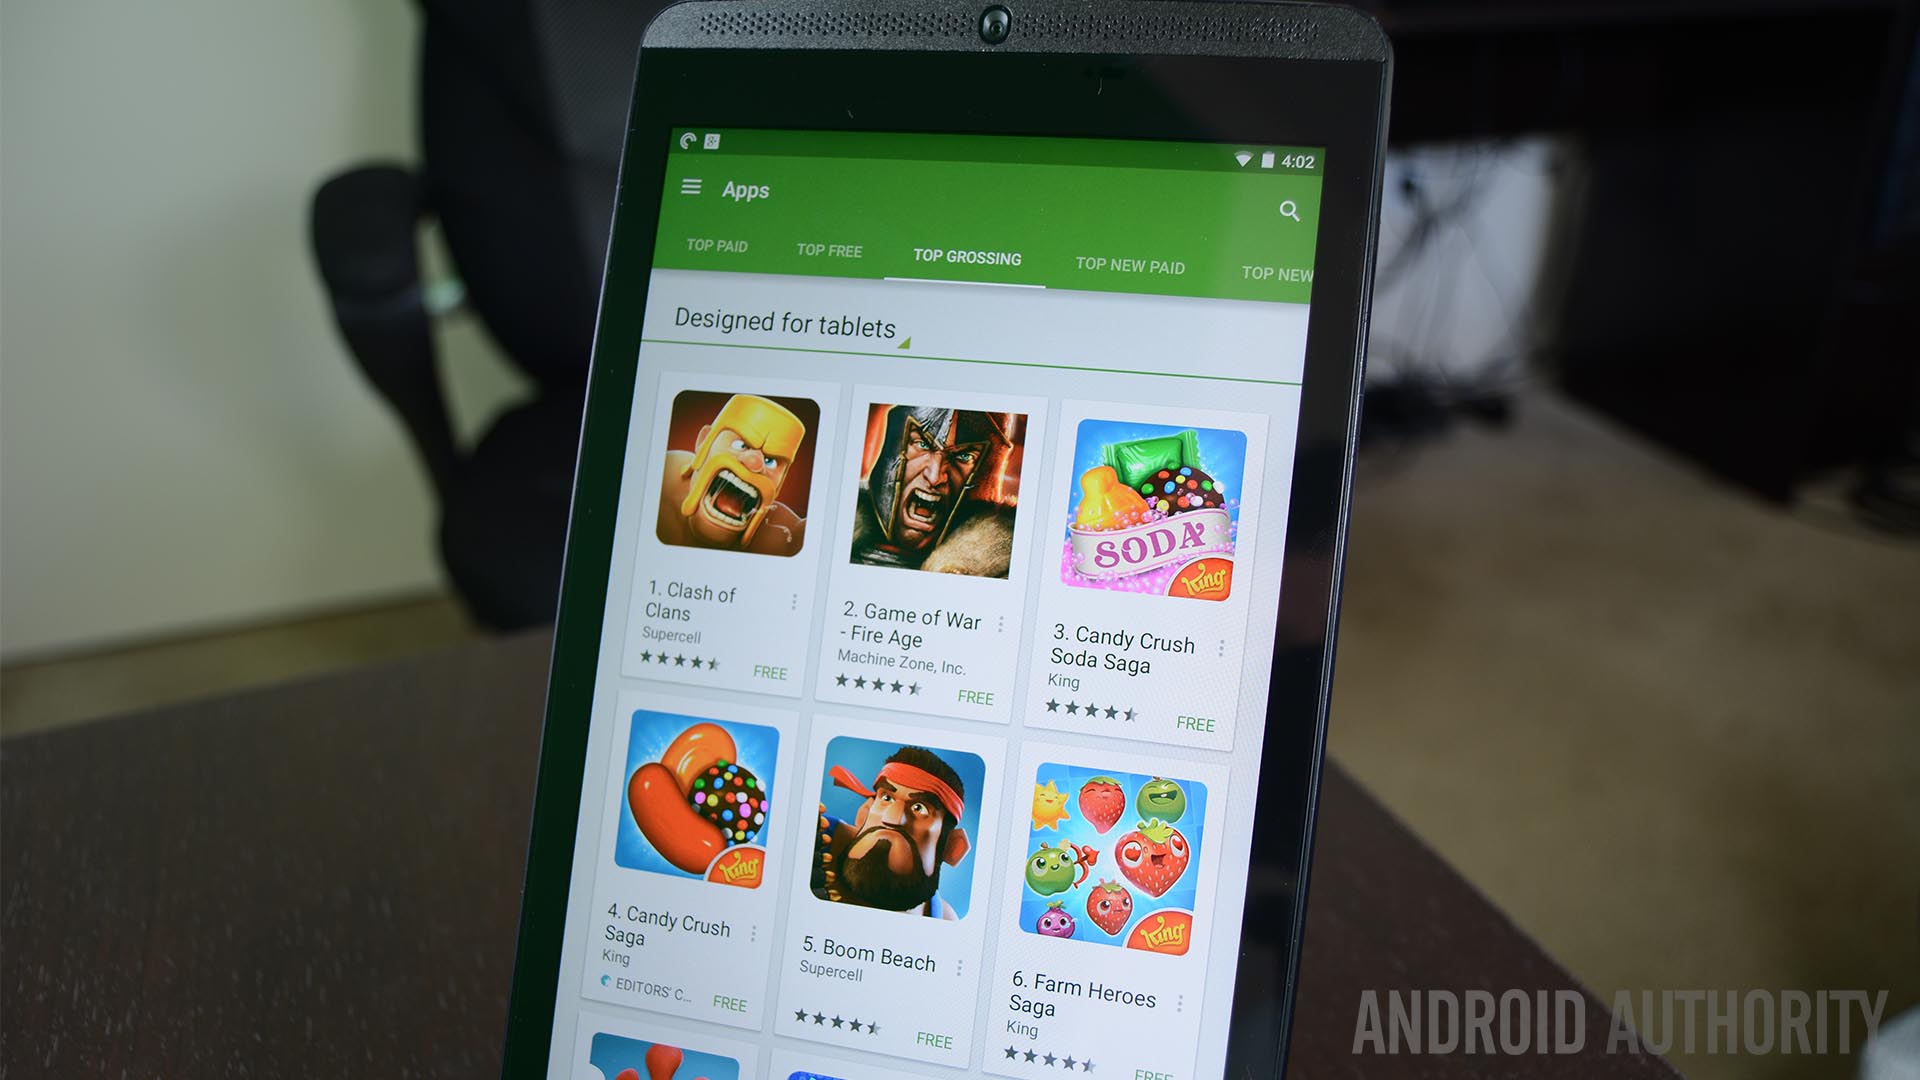 Google tightens requirements for Play Store, Android apps must be 64-bit by  August 2019 - India Today